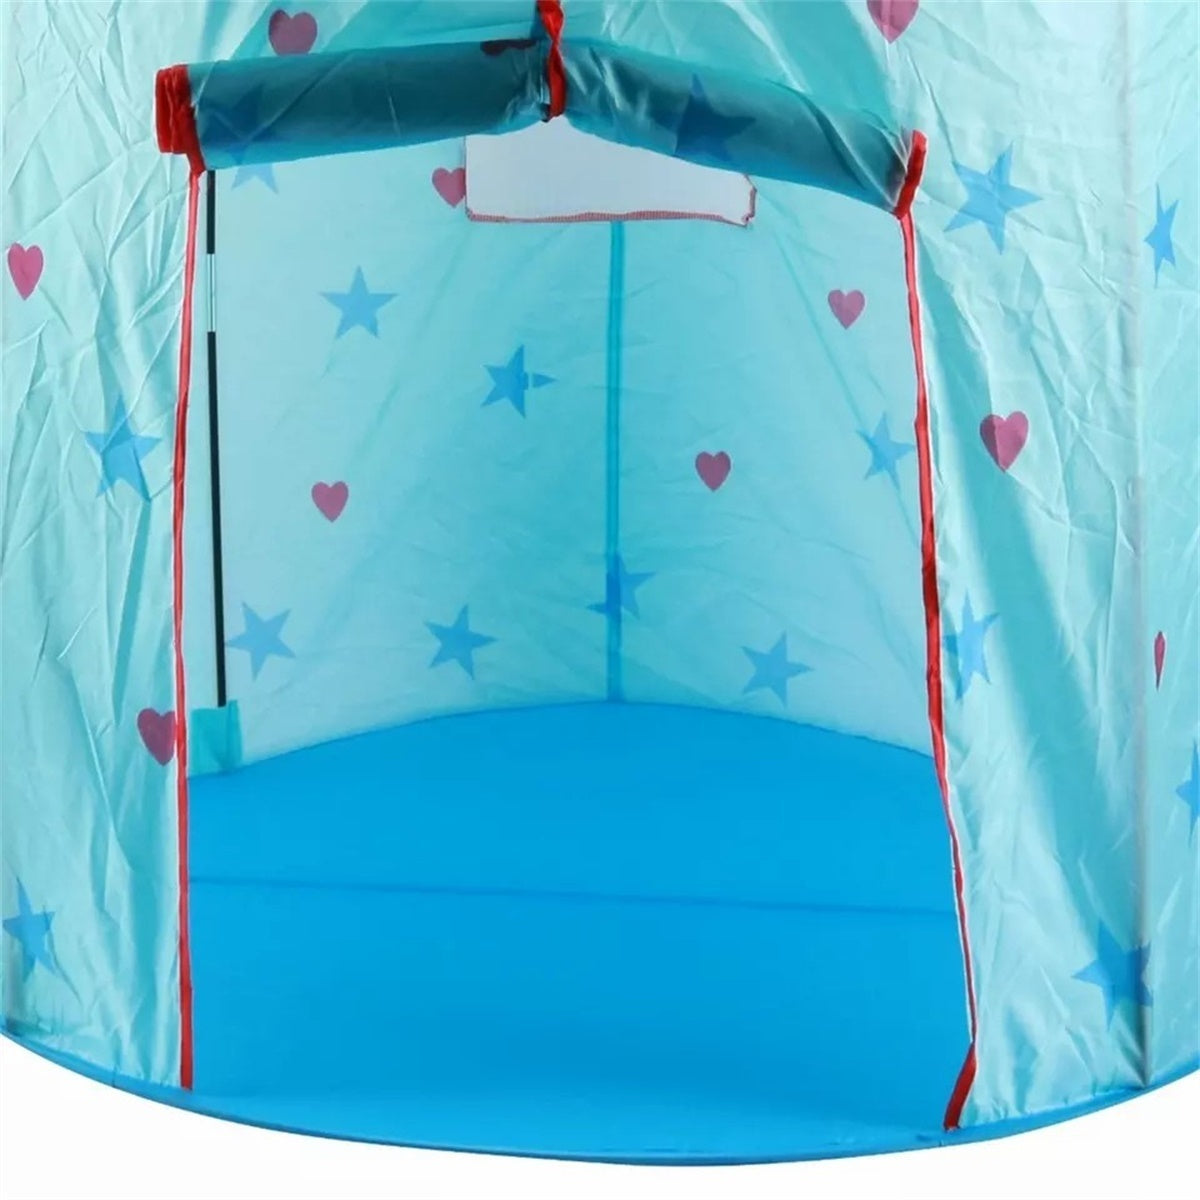 Princess Castle Play Tent, Kids Foldable Games Tent House Toy for Indoor & Outdoor Use-Pink